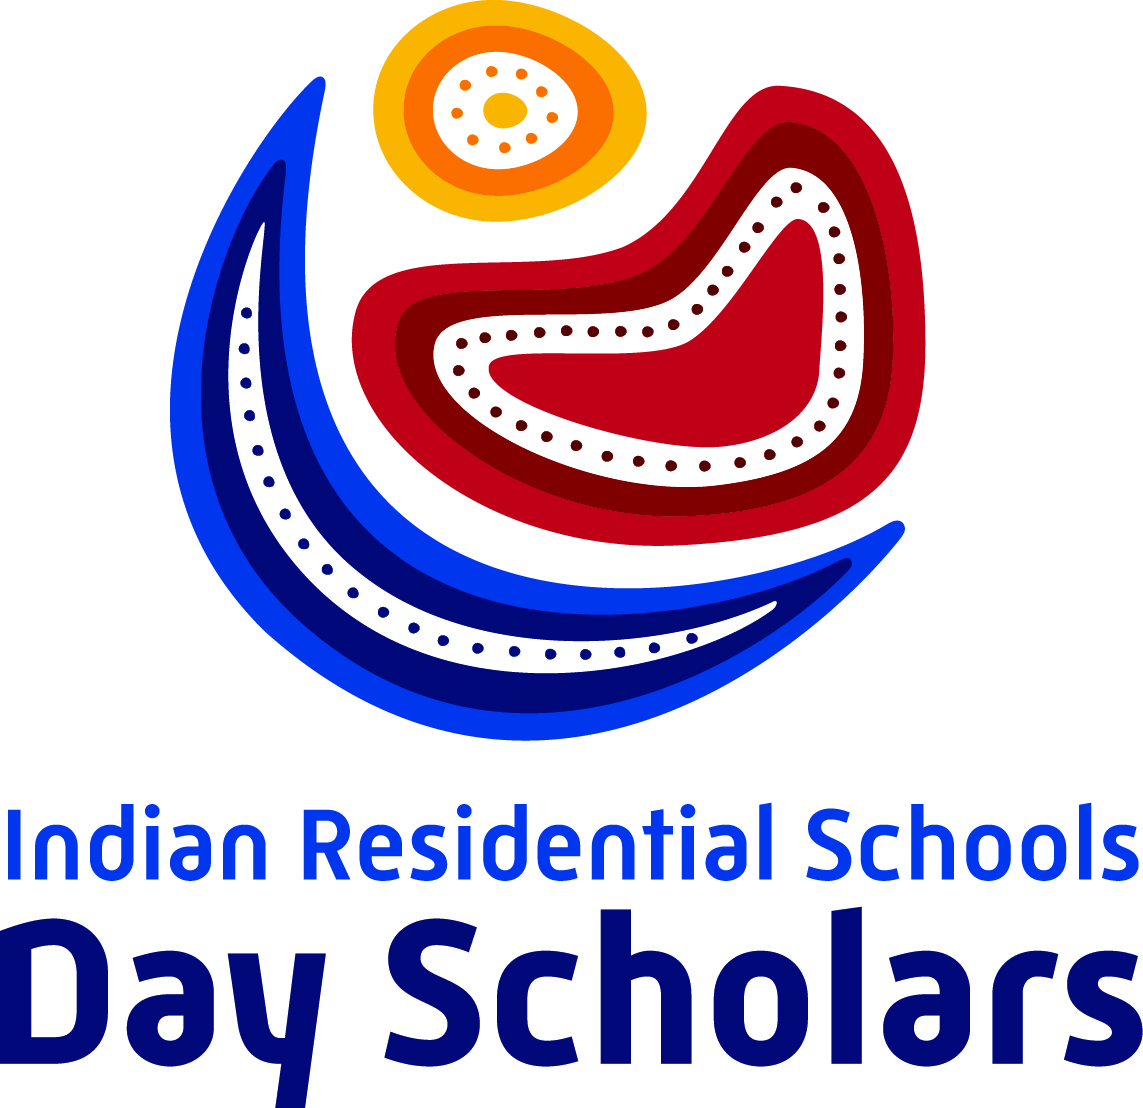 Indian residential schools day scholars